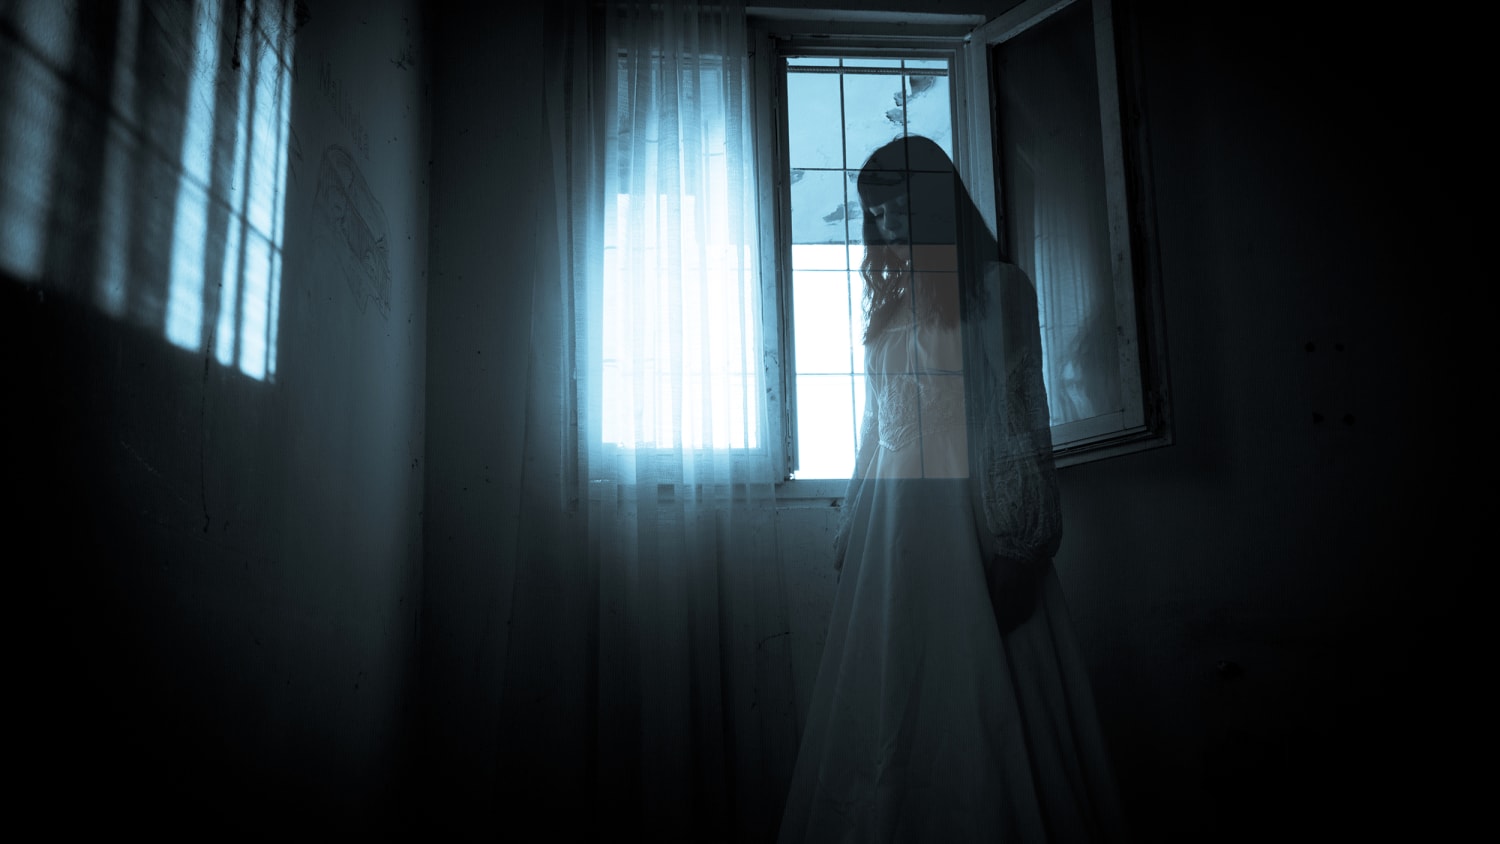 Have you seen a ghost? There are medical reasons